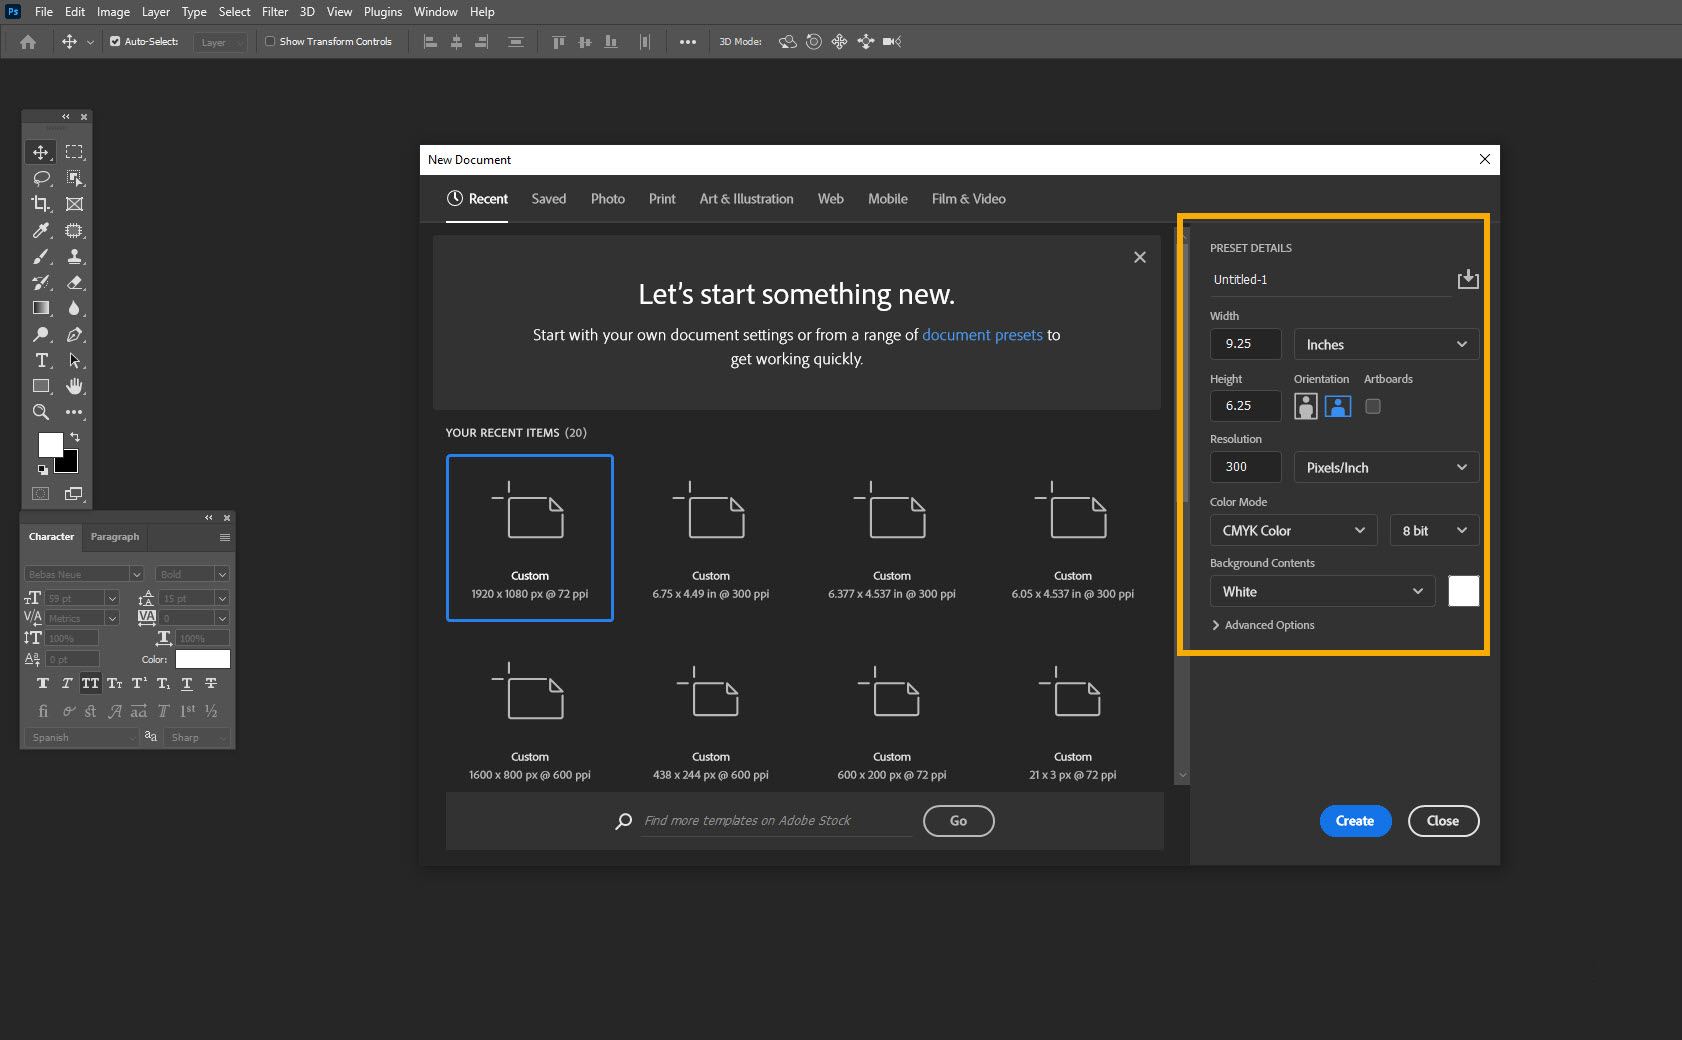 Screenshot of a New File dialog box in Adobe Photoshop showing the settings for creating a print file.